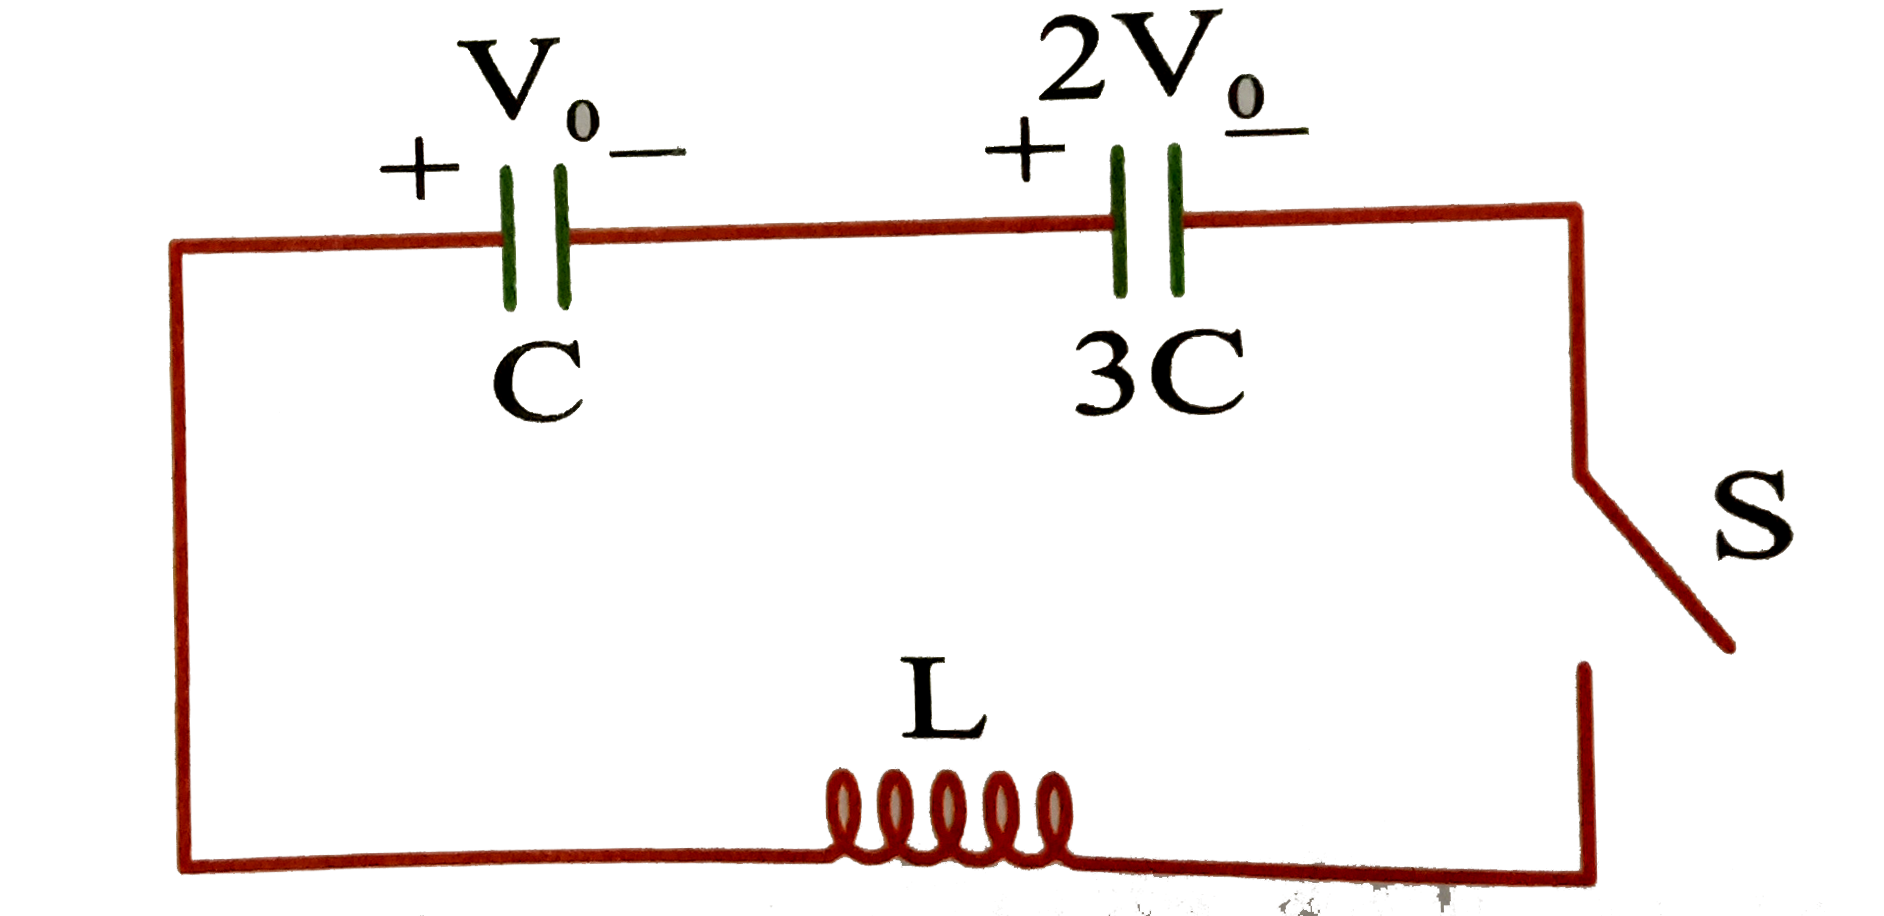 Two capacitors of capacitance C and 3C are charged to potential difference V(0) and 2V(0) respectively, and connected to an inductor of inductance L as shown in figure. Initially the current in the inductor is zero. Now, the switch S is closed.      Potential difference across capacitor of capacitance C when the current in the cirucit is maximum is